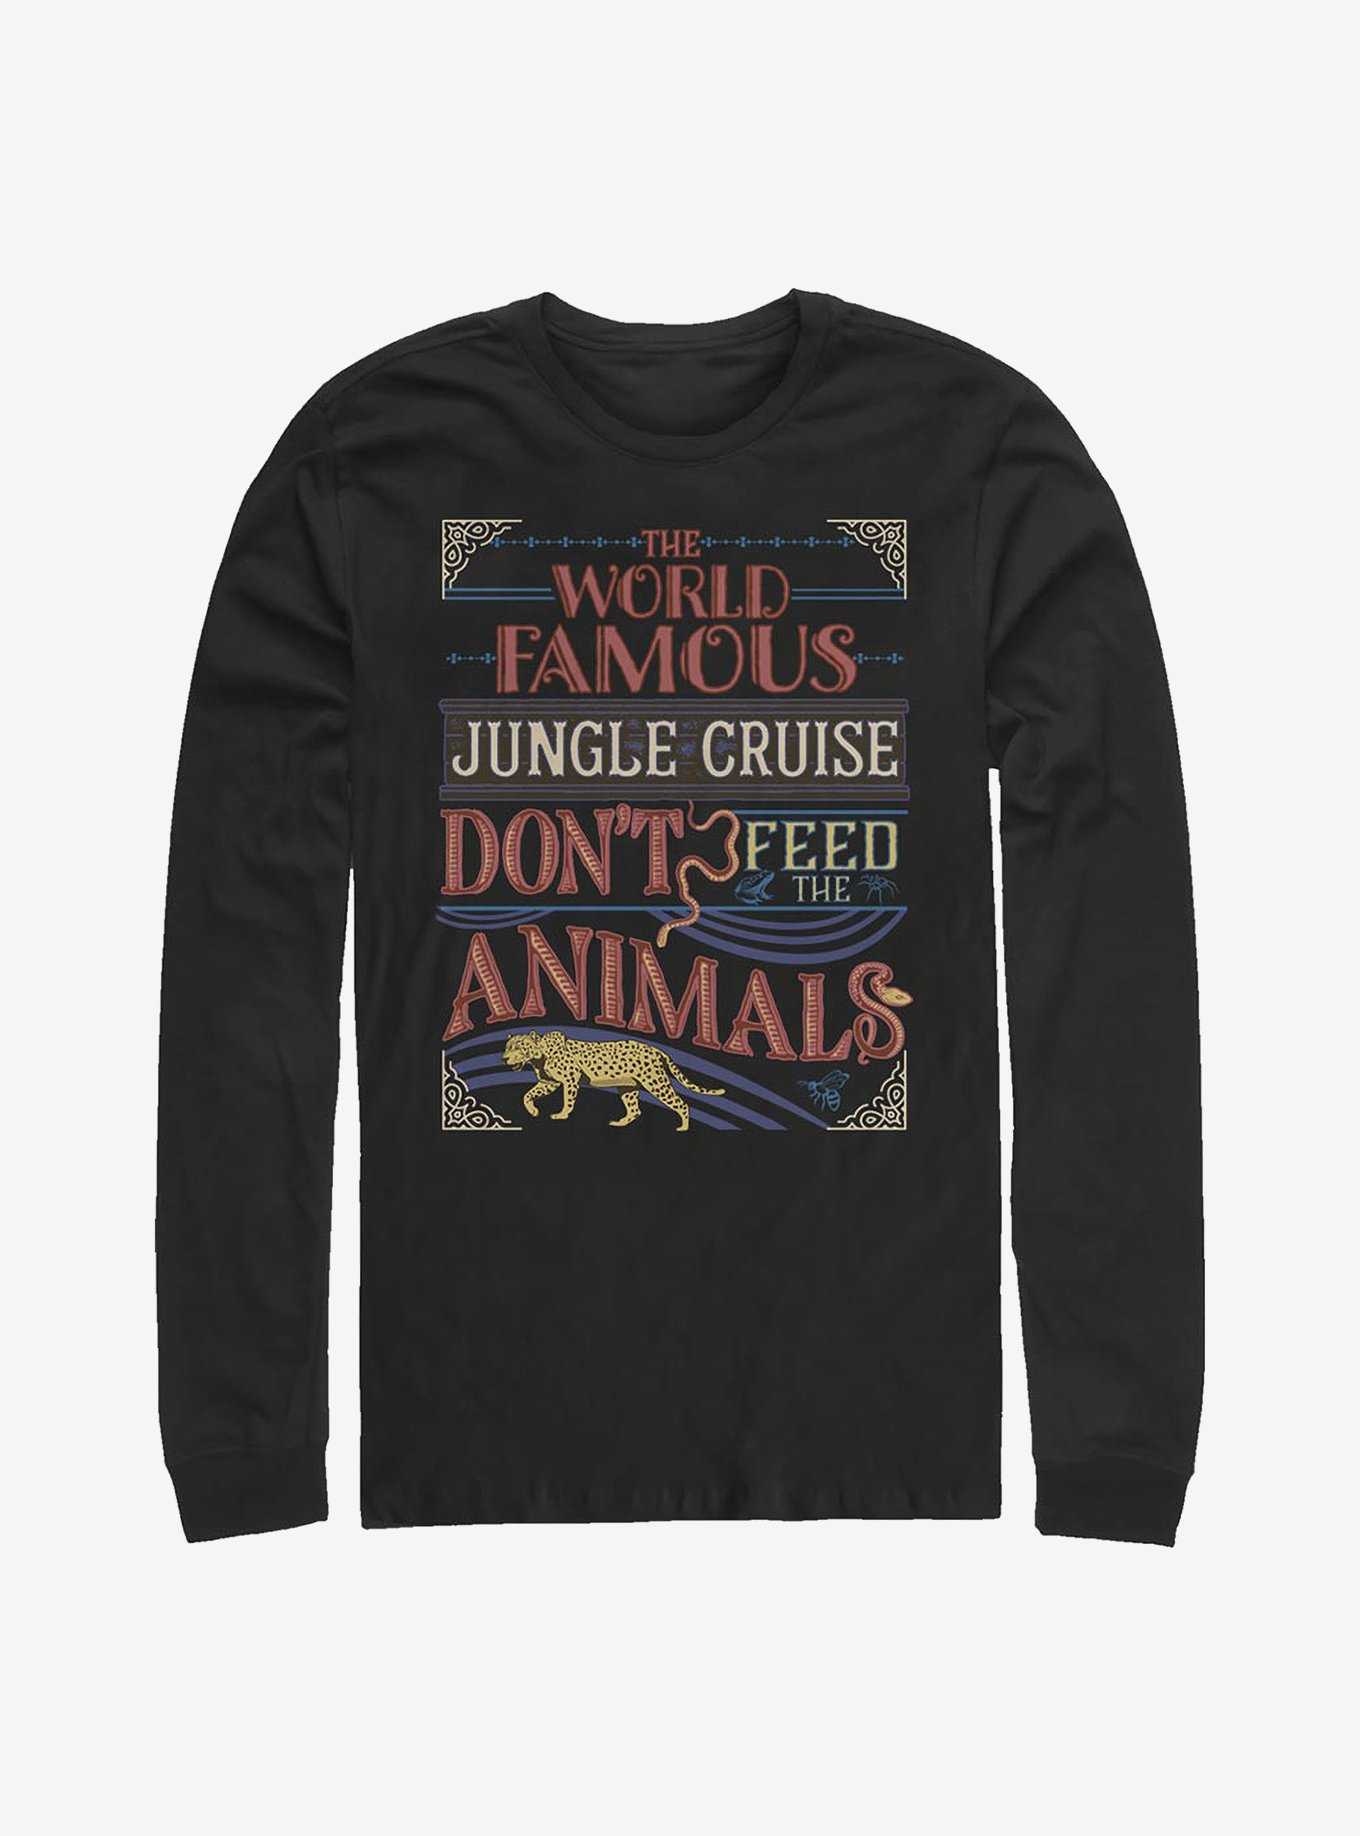 Disney Jungle Cruise The World Famous Jungle Cruise Don't Feed The Animals Long-Sleeve T-Shirt, , hi-res